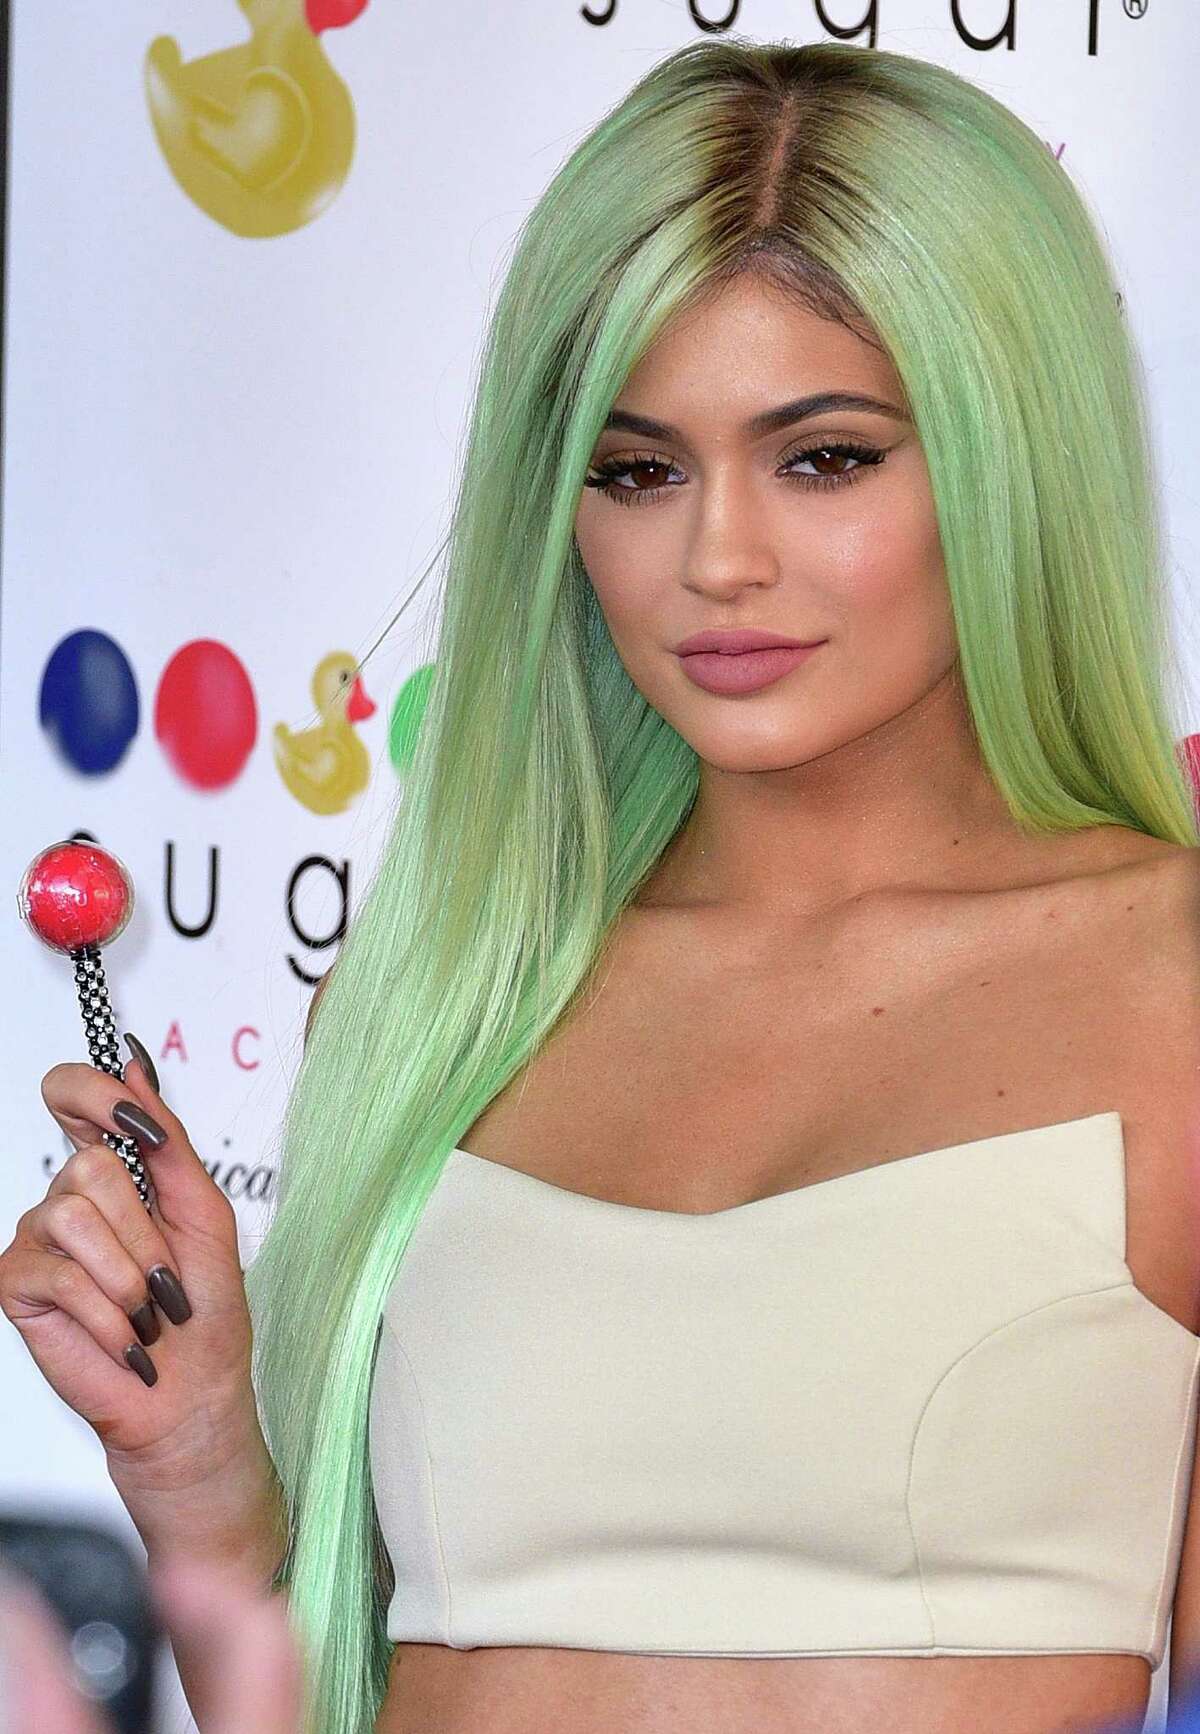 Kylie Jenner posts picture of a scar on her leg on Instagram